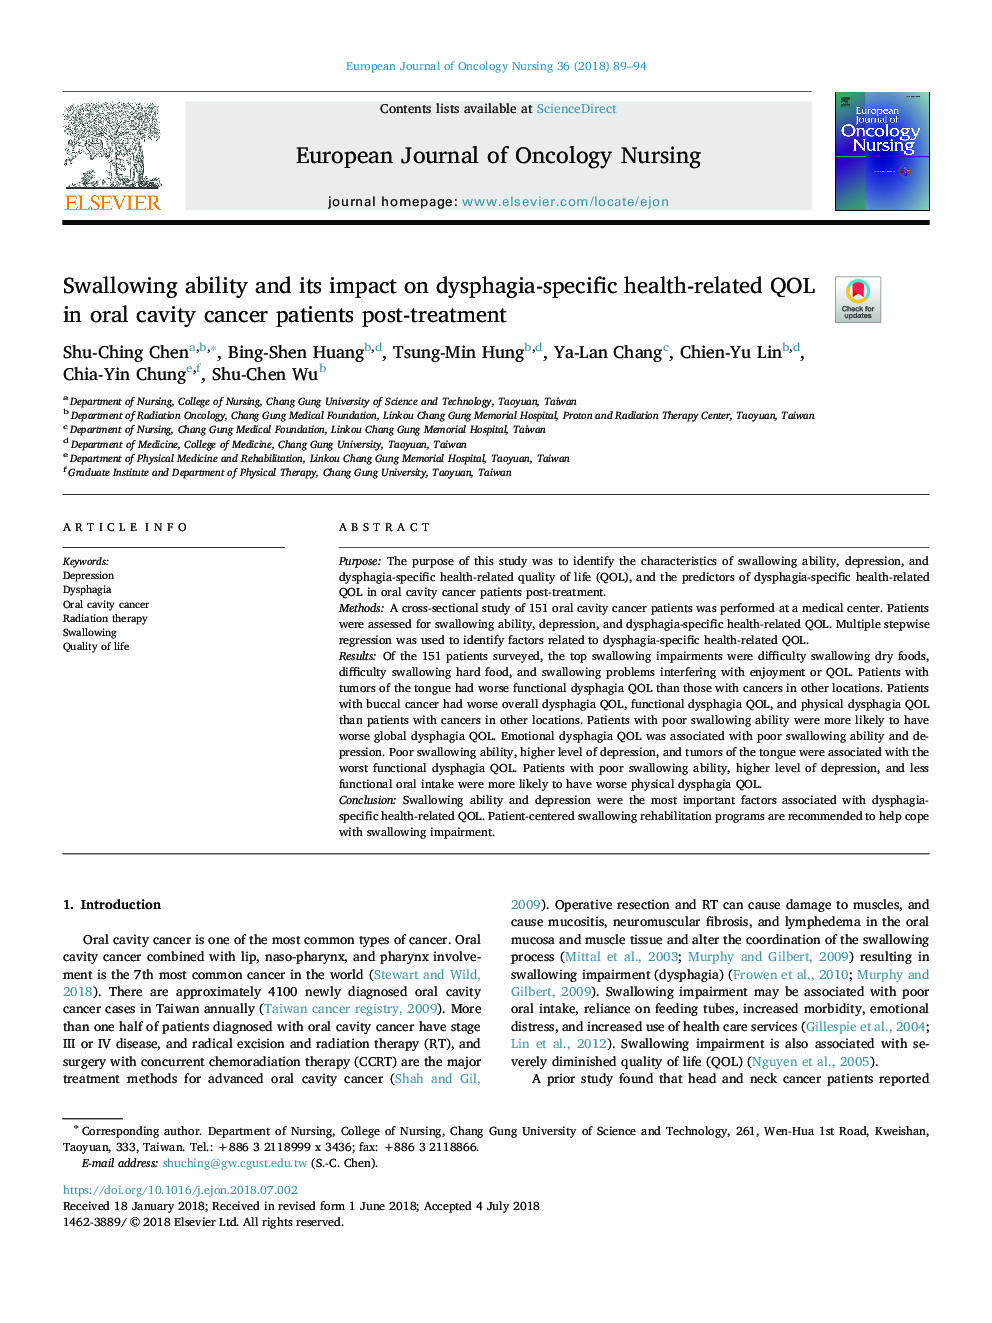 Swallowing ability and its impact on dysphagia-specific health-related QOL in oral cavity cancer patients post-treatment